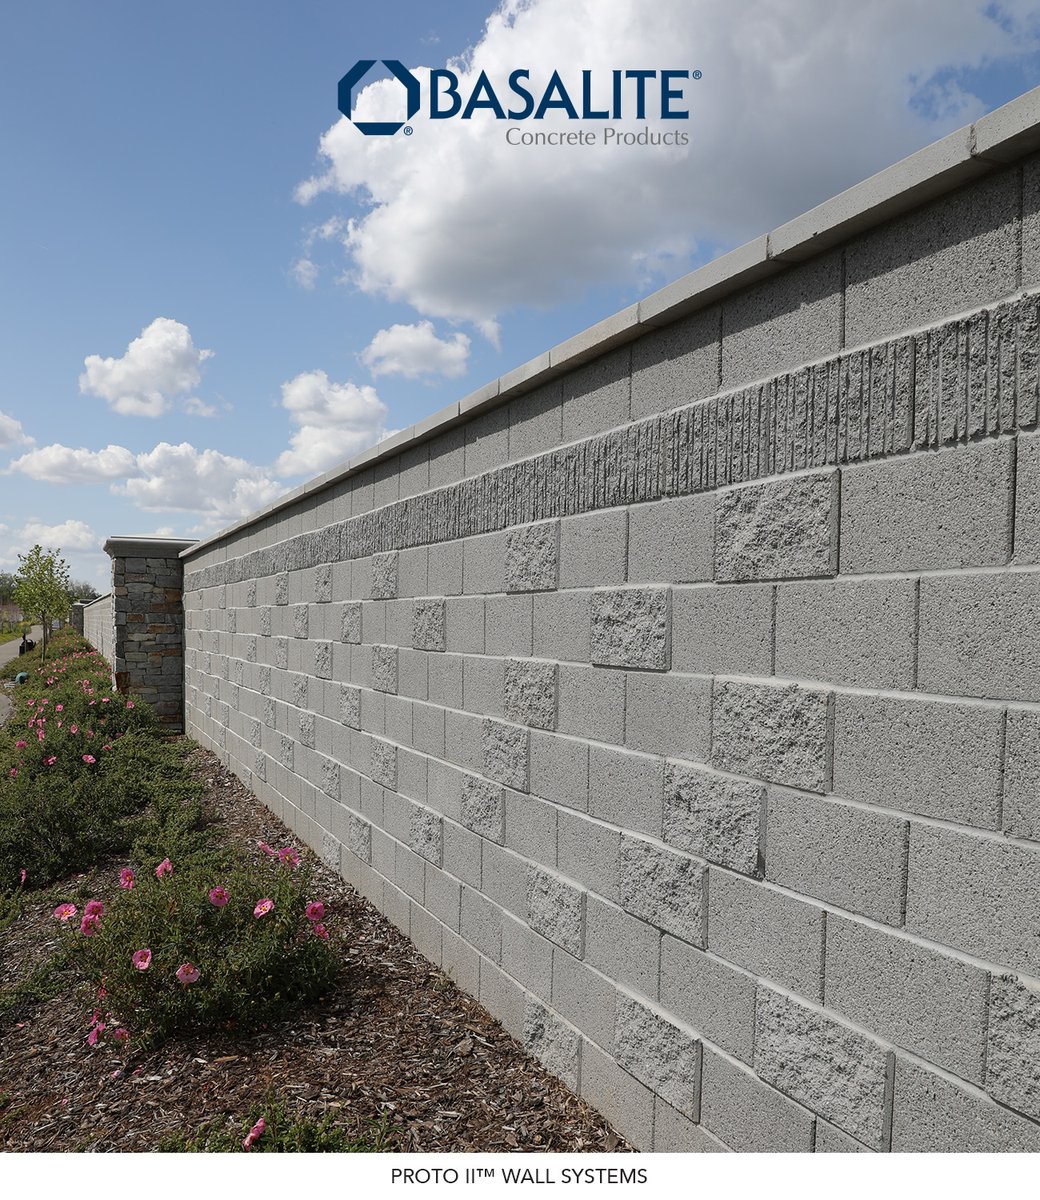 Do you know what makes the Proto II Wall System unique?
•
•
#engineered #masonry #posttension #structural #costeffective #newhome #community #lincoln #turkeycreek #basaliteconcreteproducts #basalite #taylormorrison #taylormorrisonhomes #turkeycreekgc #turkeycreekgolfclub